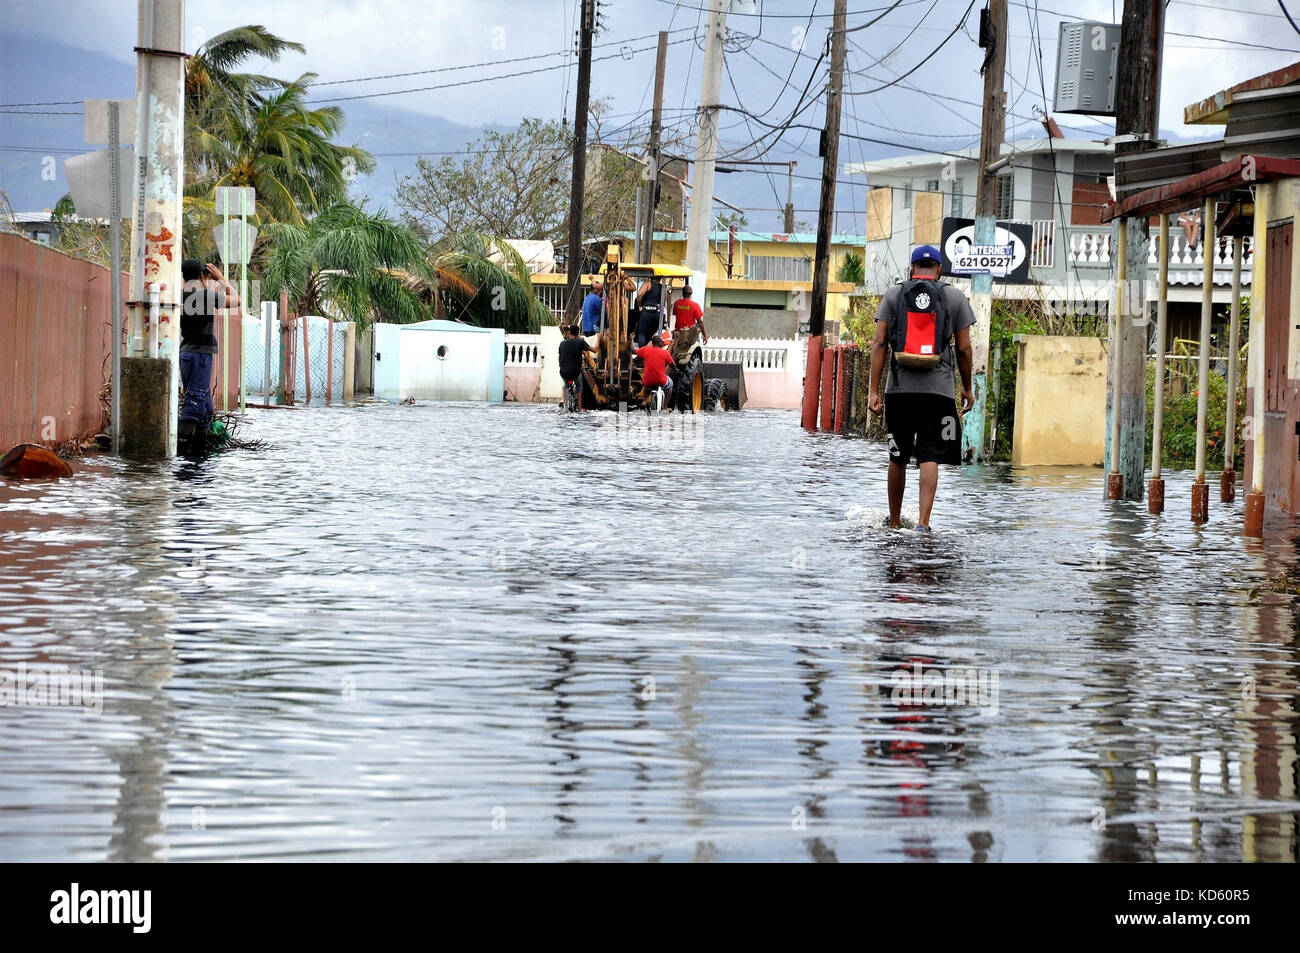 The areas affected by Hurricane María in the municipalities of Loiza, Canóvanas and surrounding areas. Personnel from the Federal Emergency Management Stock Photo